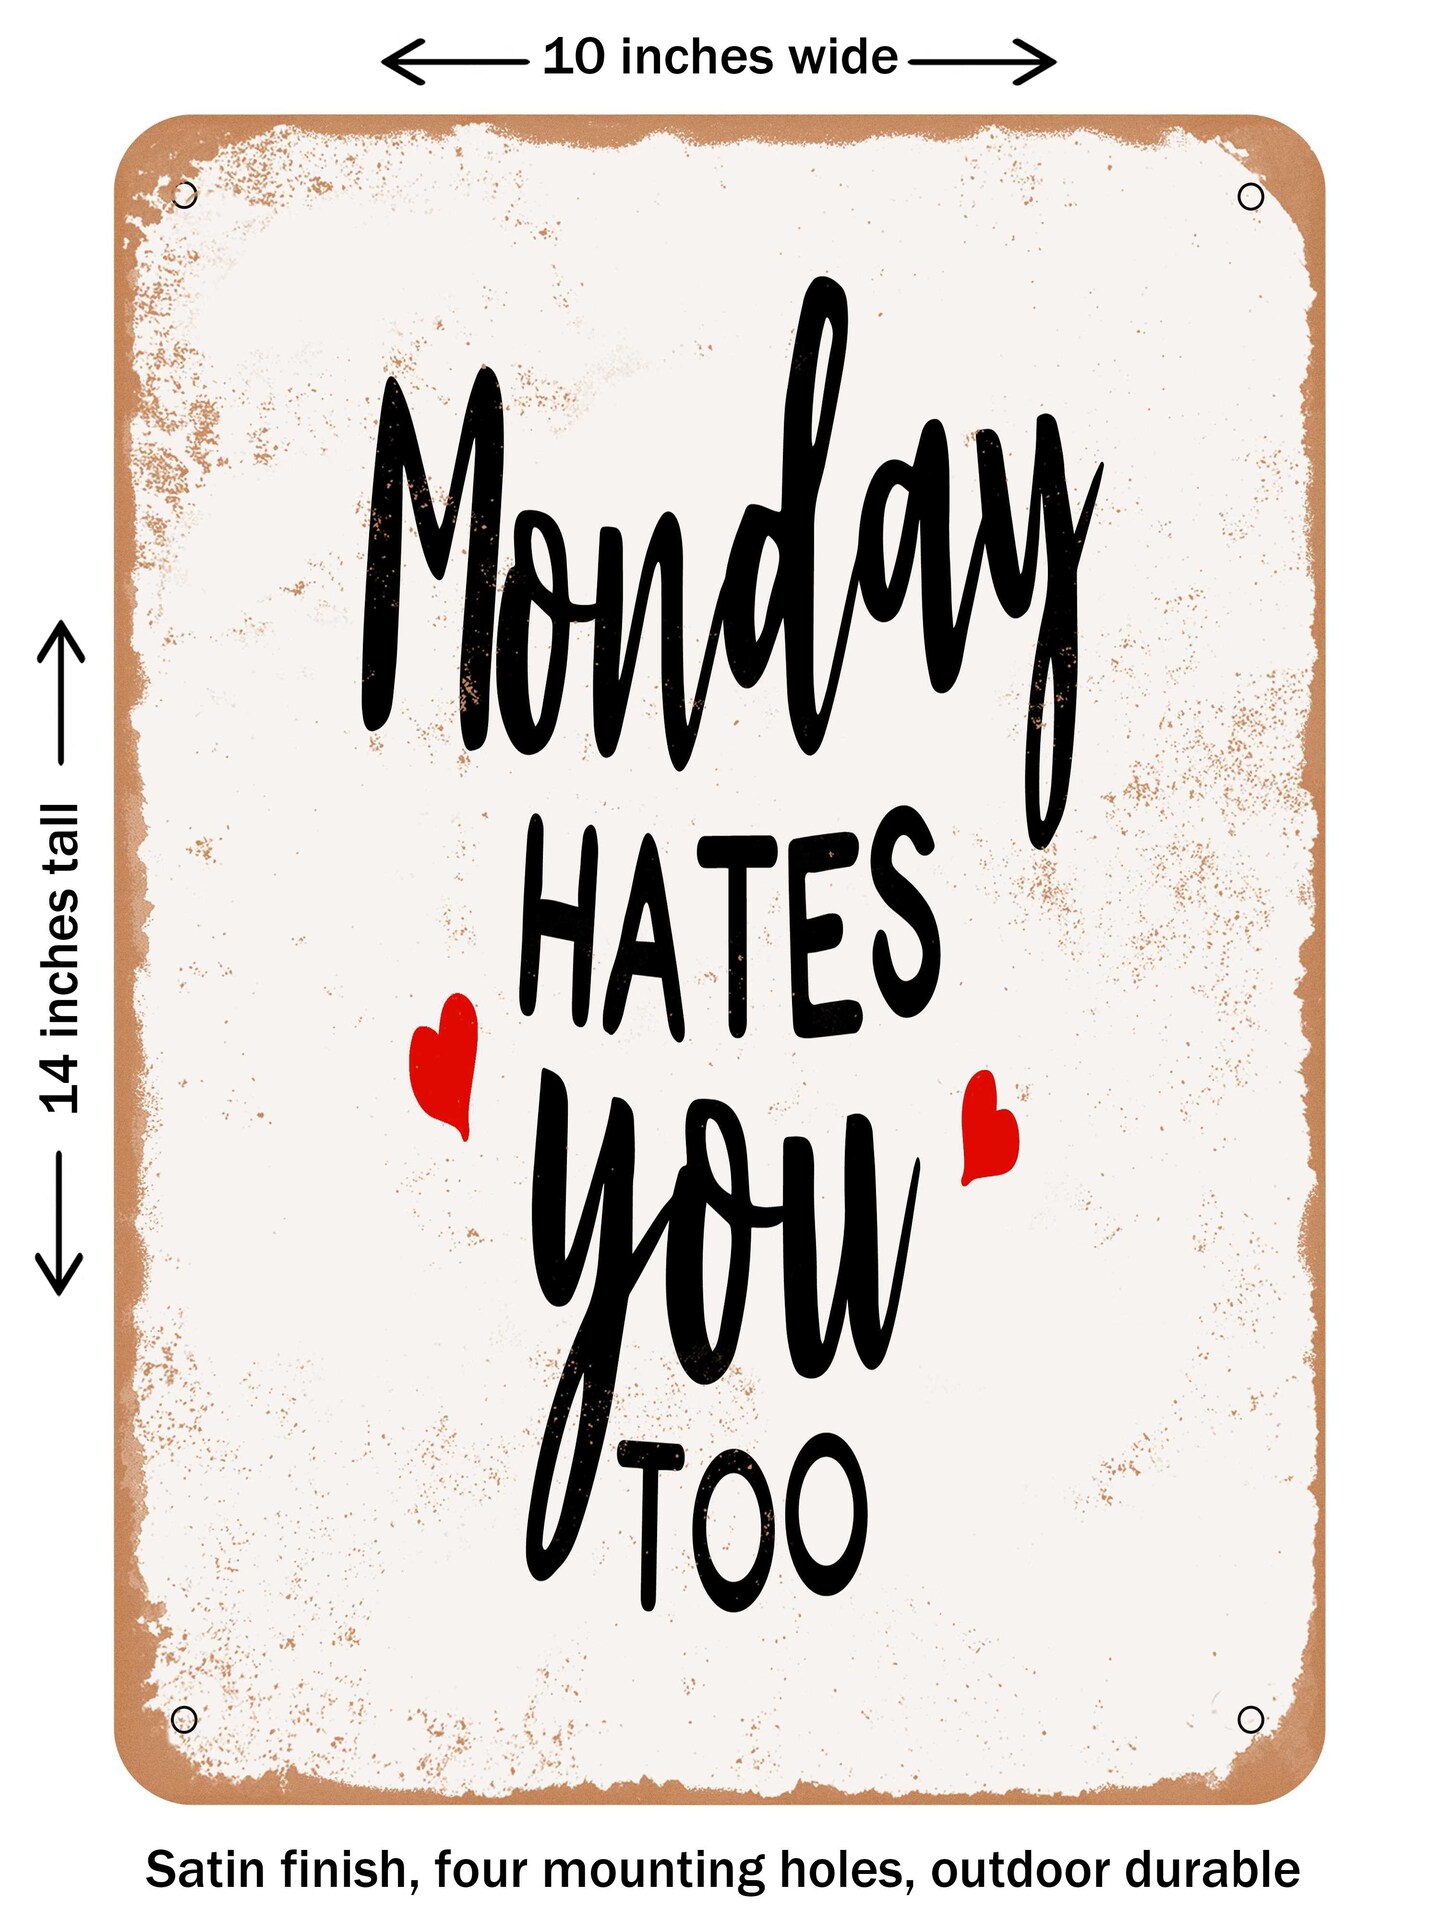 DECORATIVE METAL SIGN - Monday Hates You too - Vintage Rusty Look